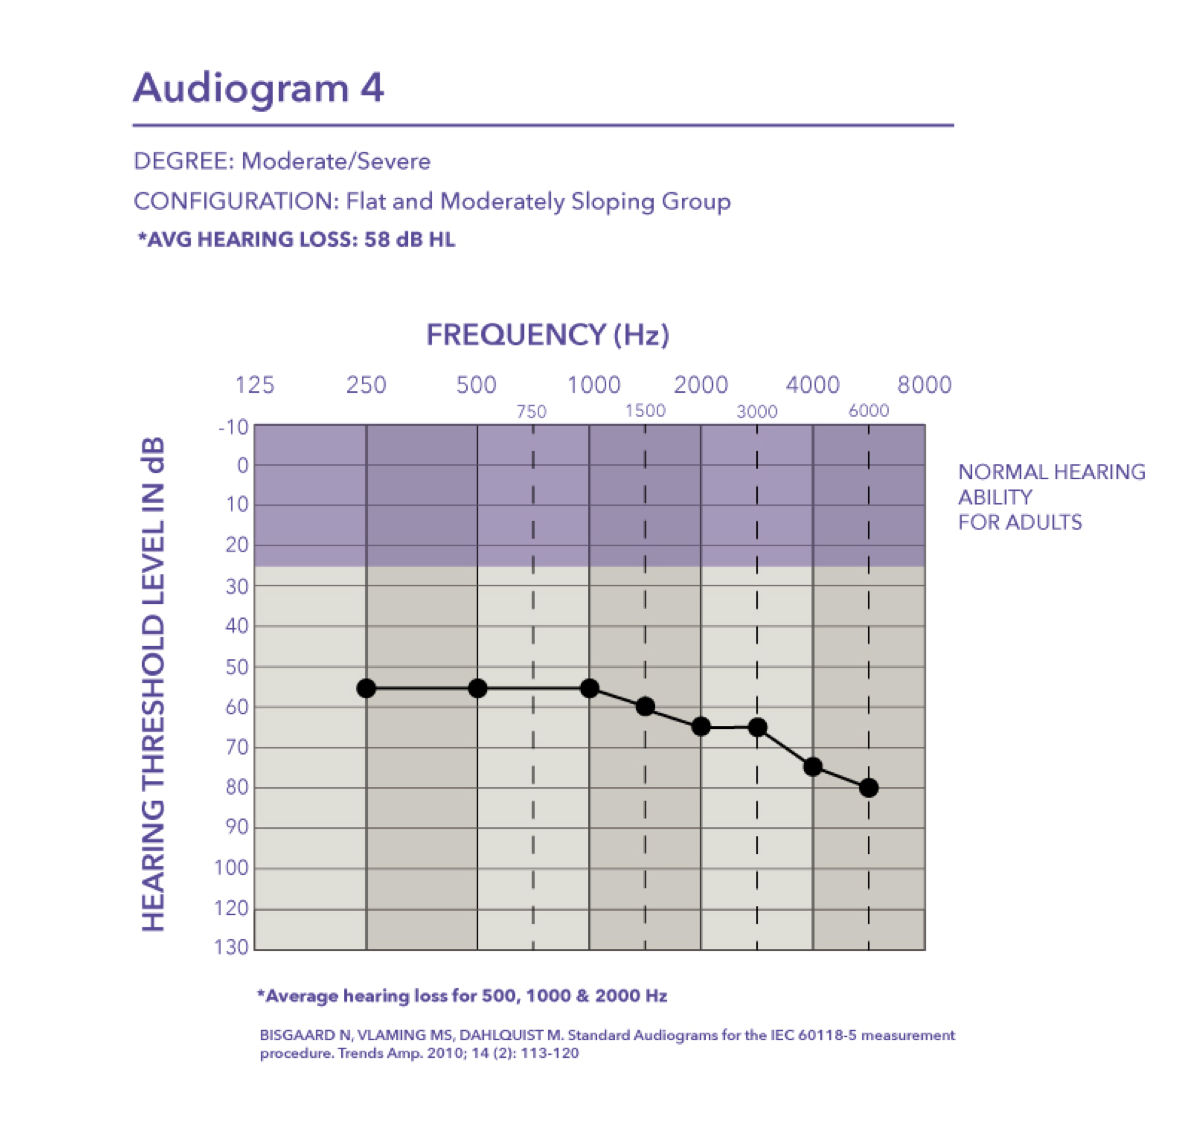 Moderate to severe hearing loss with a pure tone average of 58 dB HL